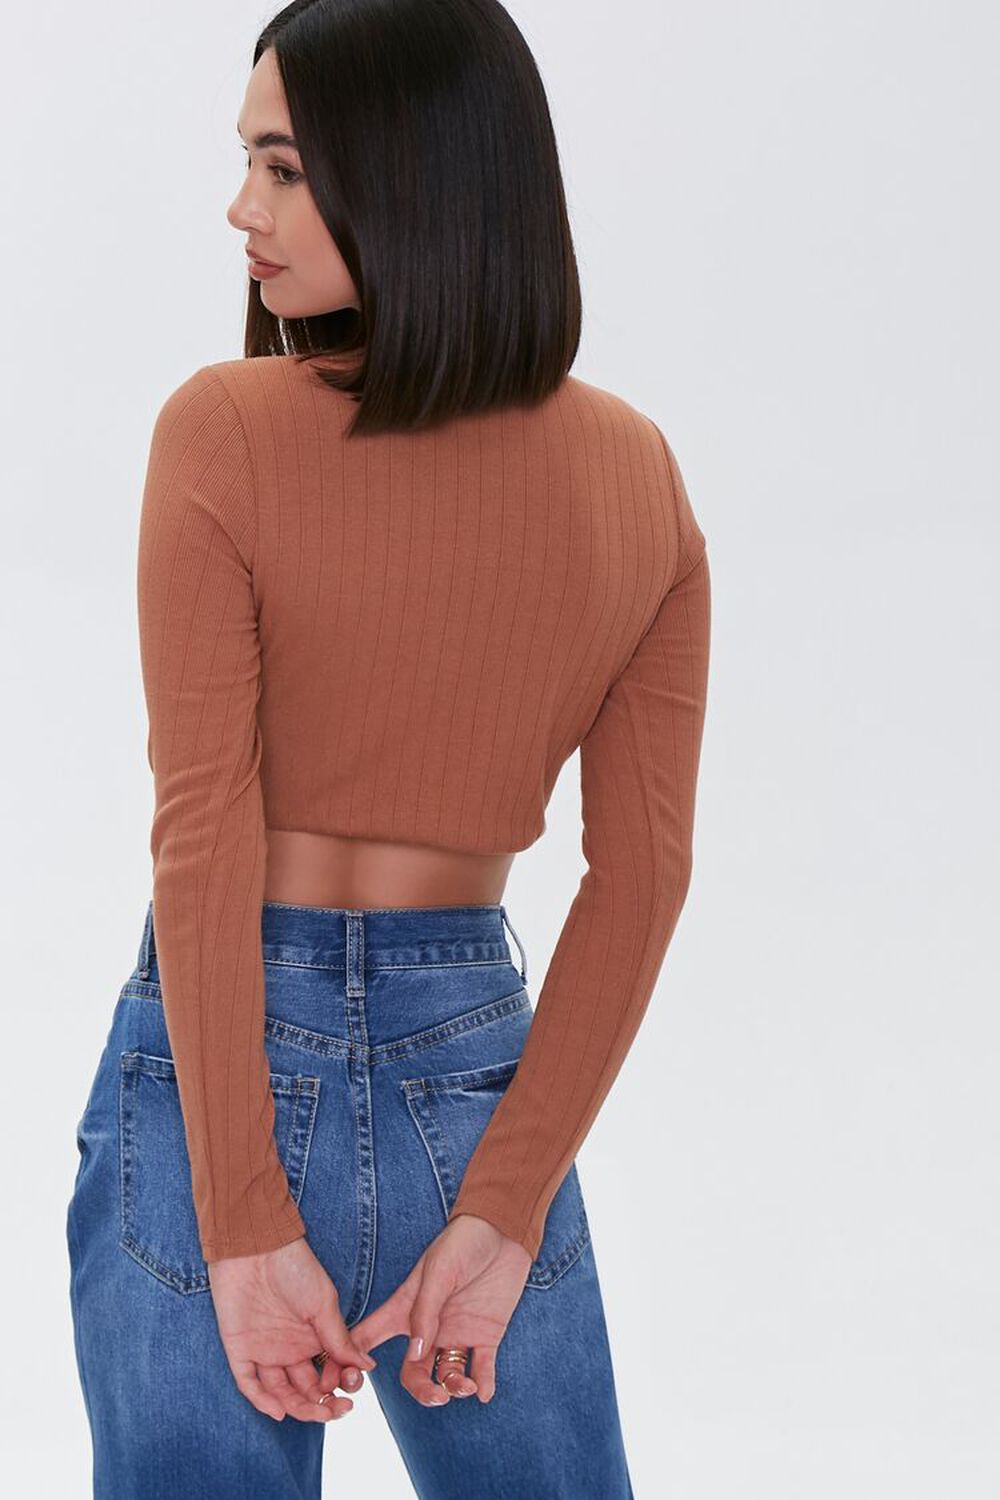 MOCHA Knotted Rib-Knit Crop Top, image 3